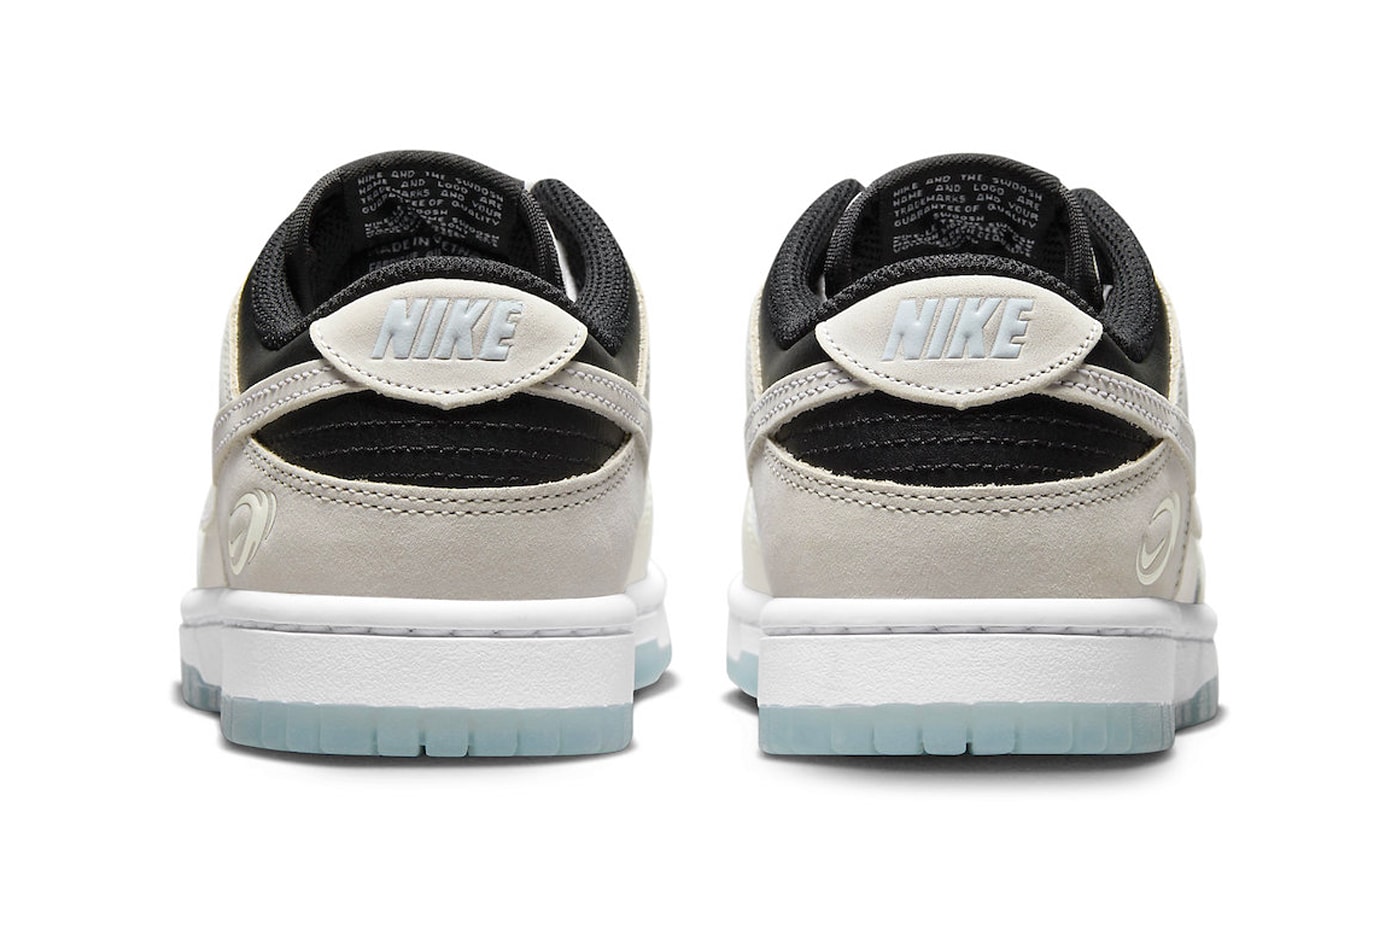 Nike Dunk Low Receives a "Supersonic" Treatment FN7646-030 White/Igloo-Black-Neutral Grey release info classic white shoes low tops swoosh air force 1 alternatives